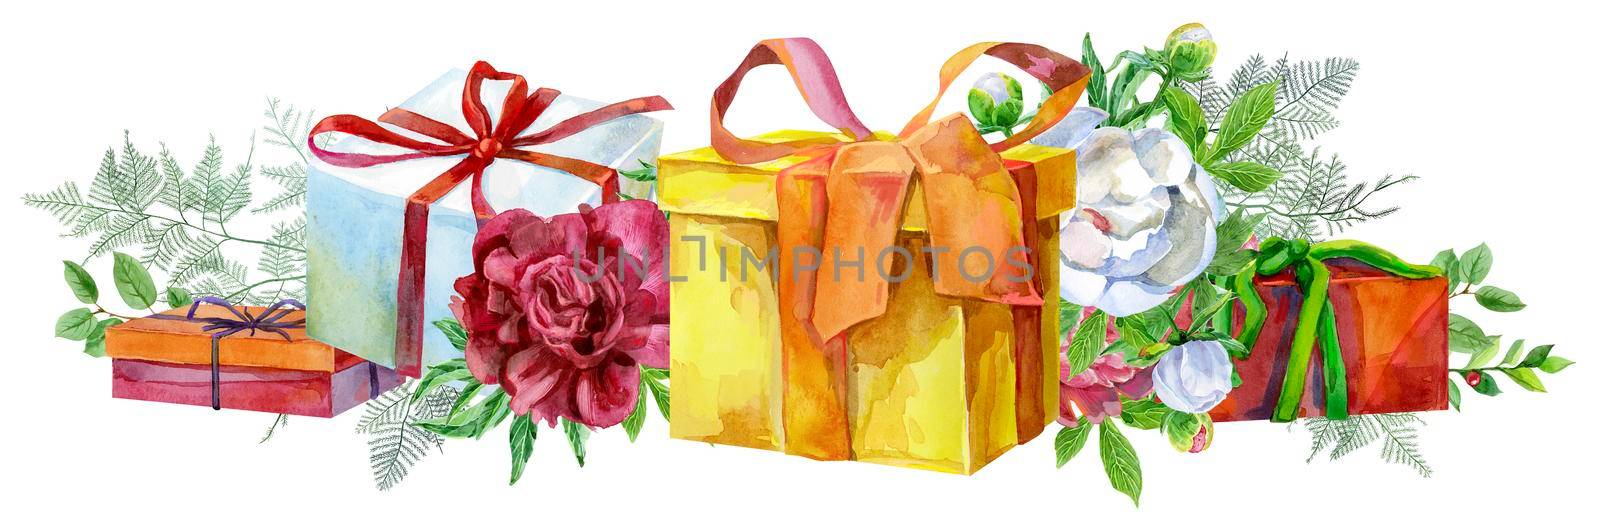 Watercolor llustration with gift boxes and peonies. For design, print or background by NataOmsk